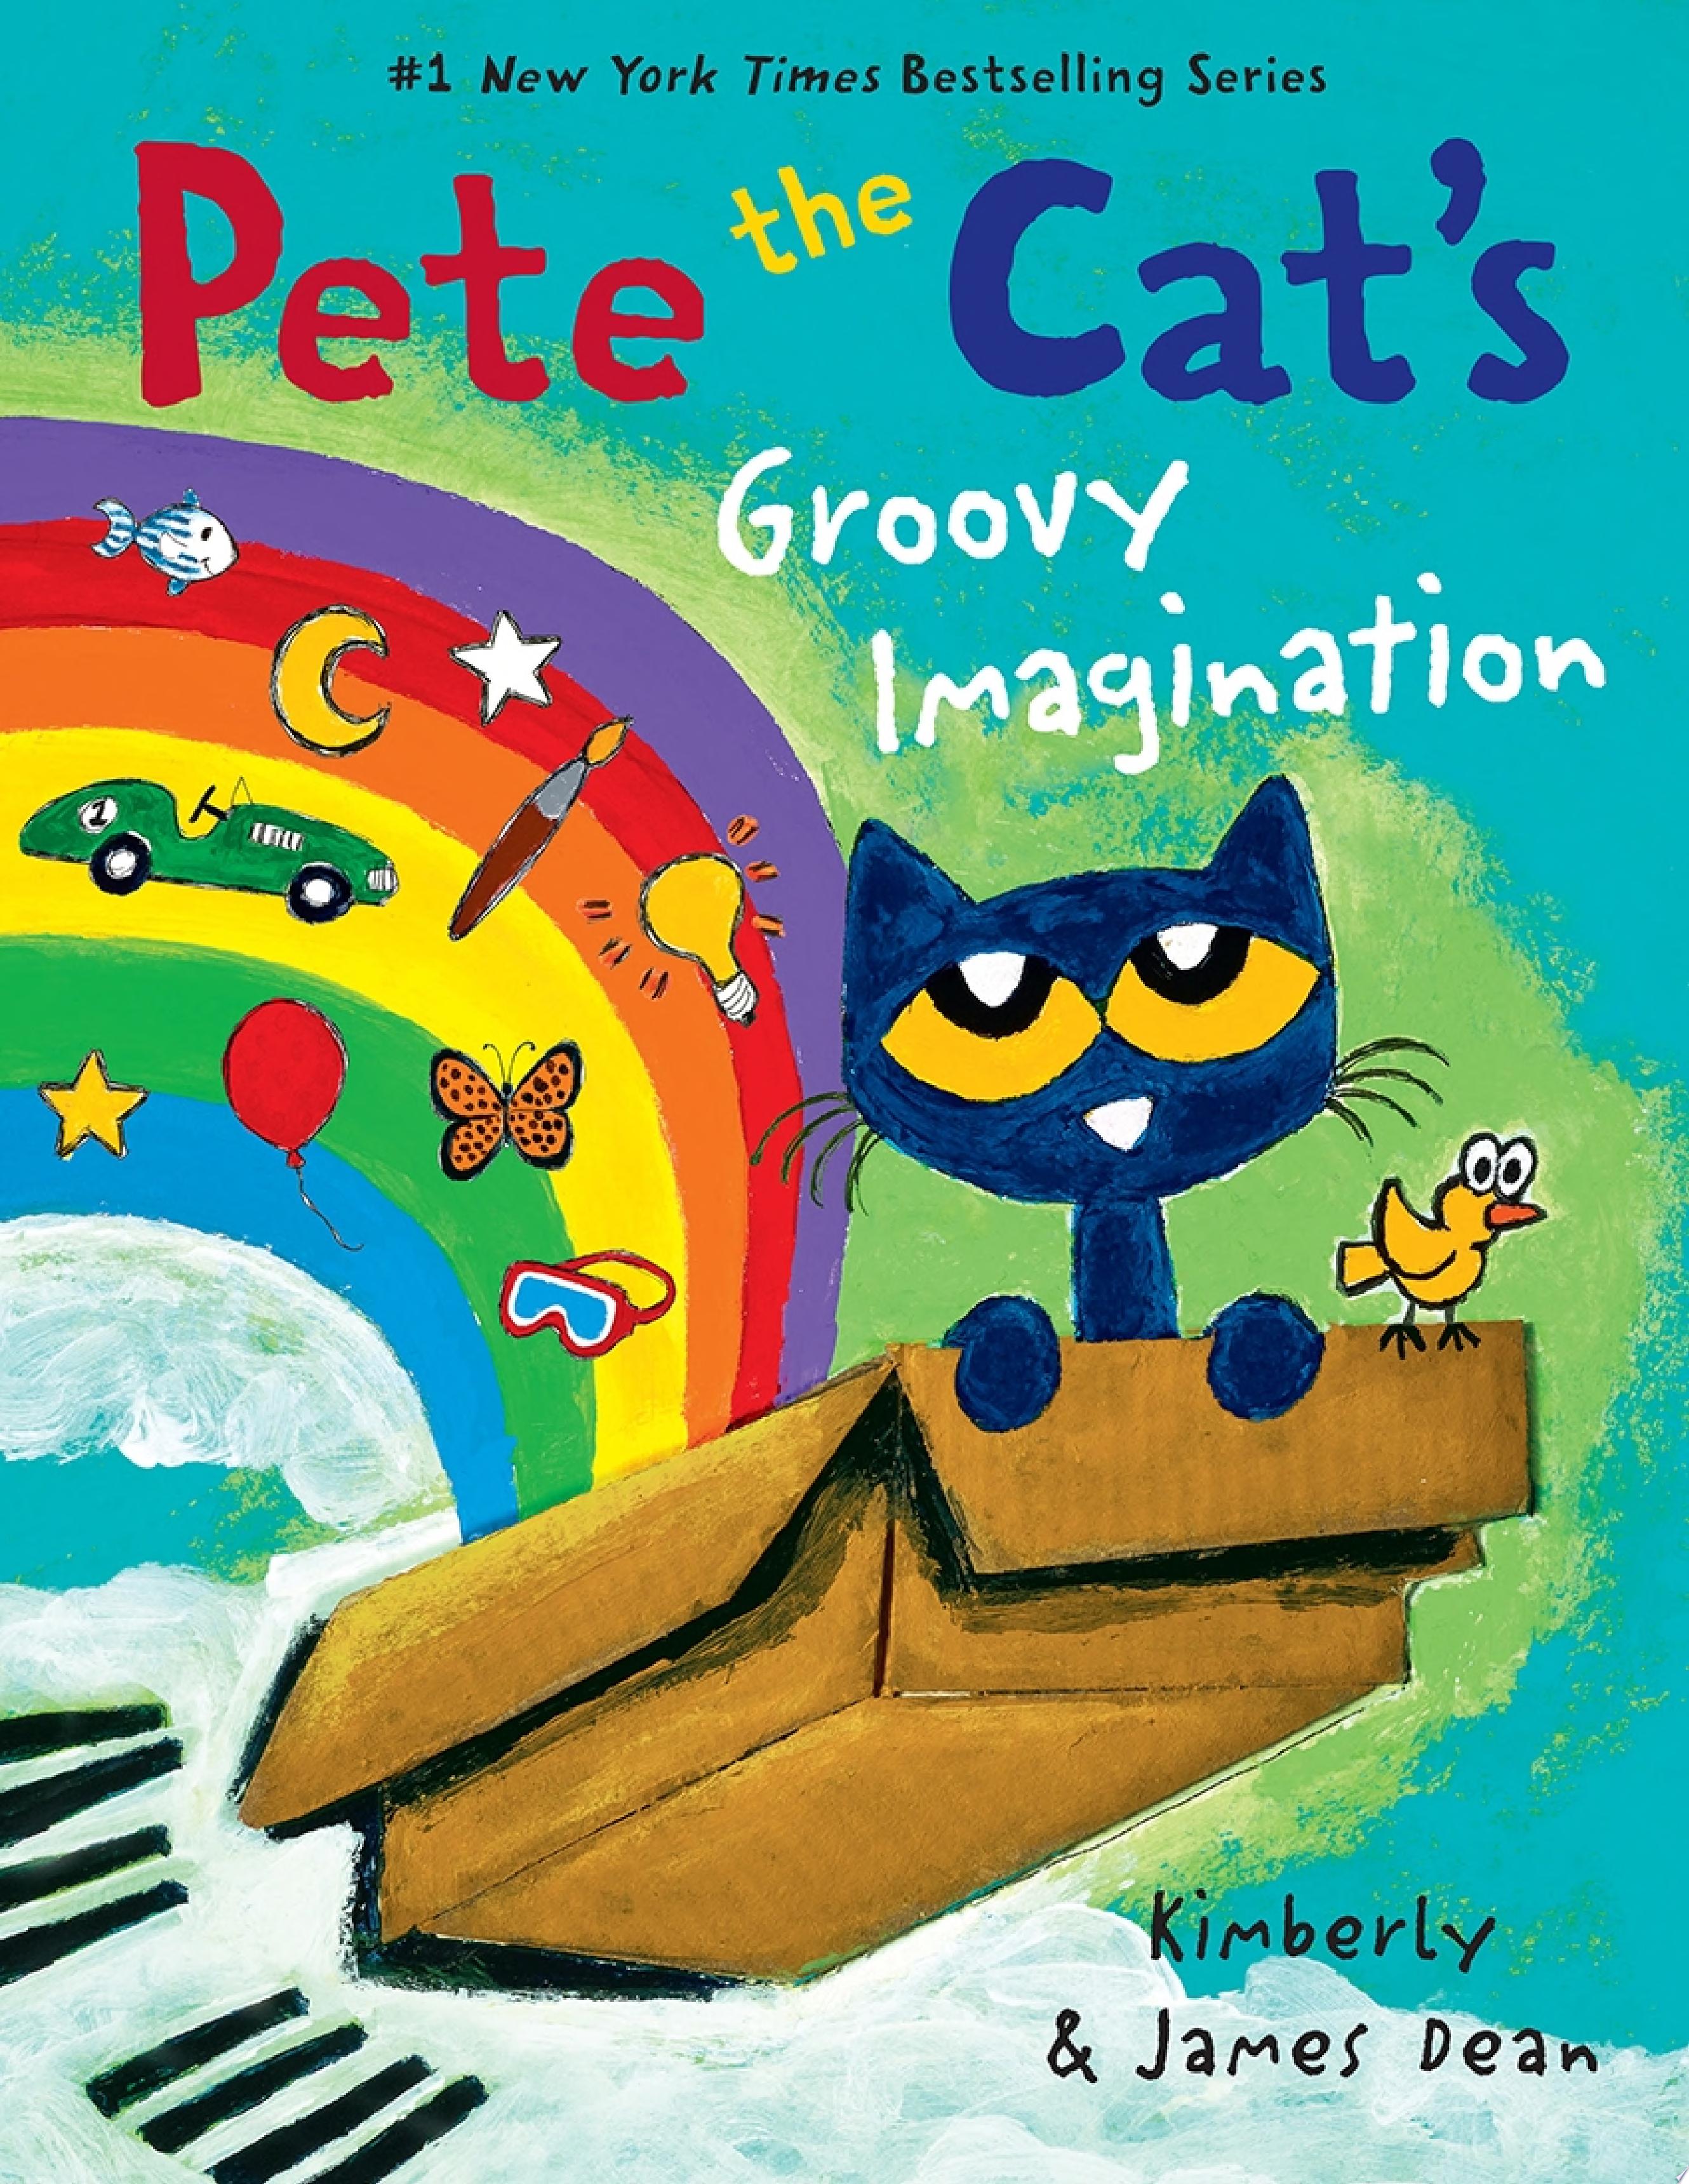 Image for "Pete the Cat's Groovy Imagination"